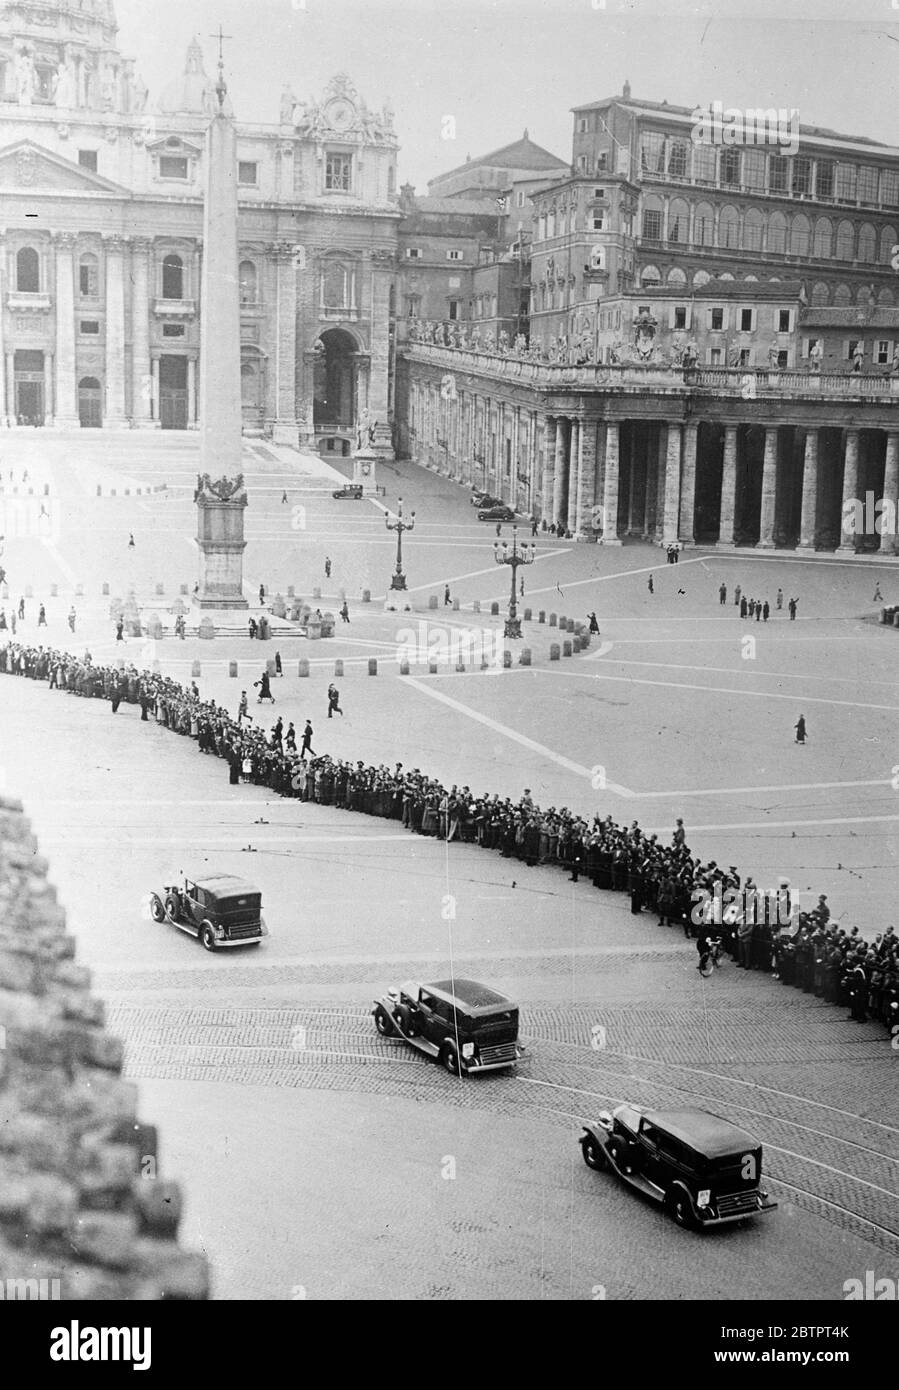 Pope returns to the Vatican. Unusual picture. An unusual picture as the Pope returned by car to the Vatican after his stay at Castel Gendolfo. Large numbers of people formed a long line across the 'Piazza'of St Peter's in the hope of seeing the Pope, who is now stated to be in fairly good health again. 3 November 1937 Stock Photo